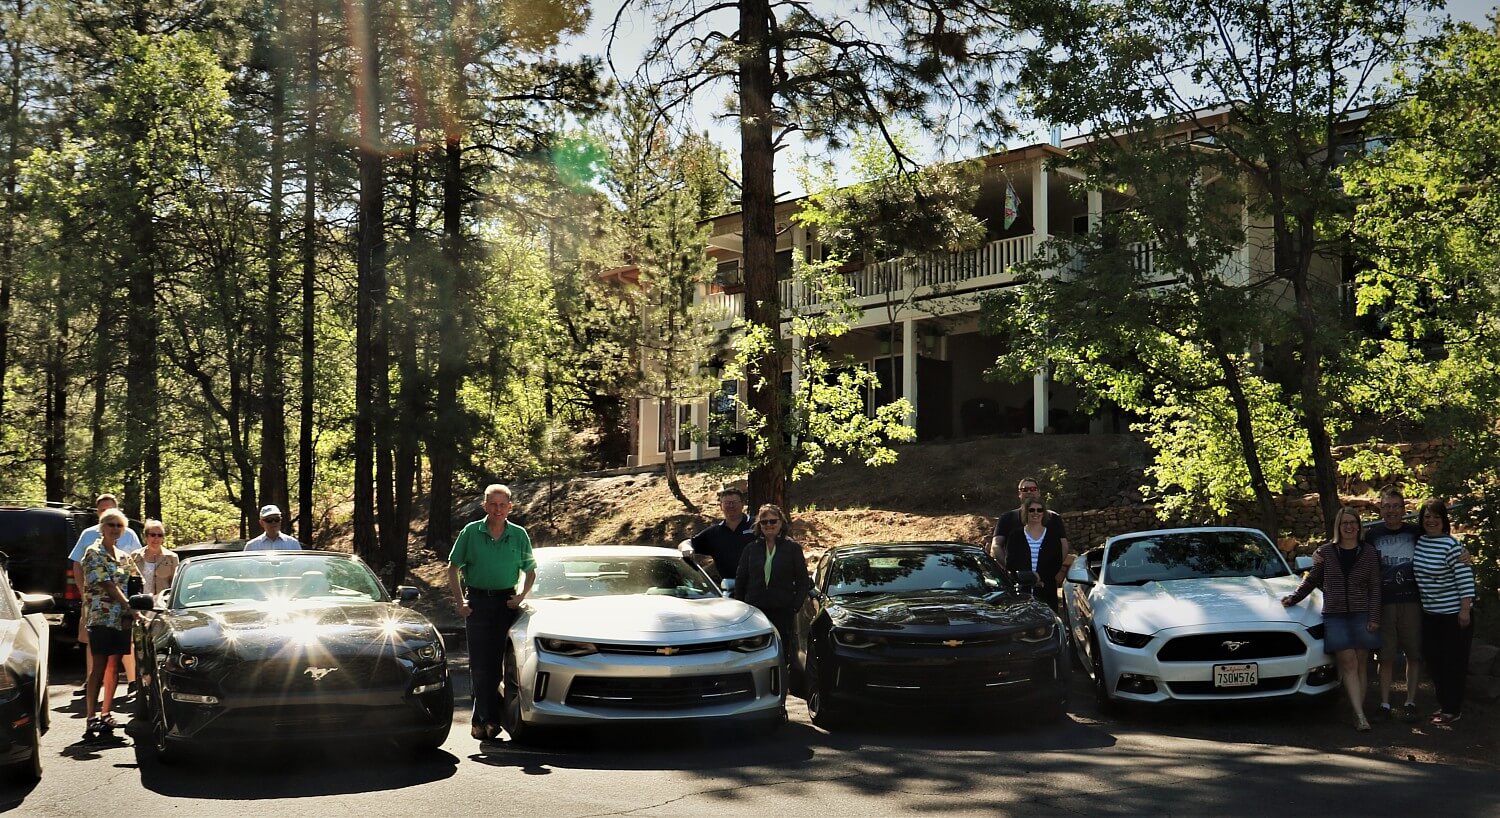 Parking lot with several people standing by black and white cars with trees and a large home up on a hill behind them